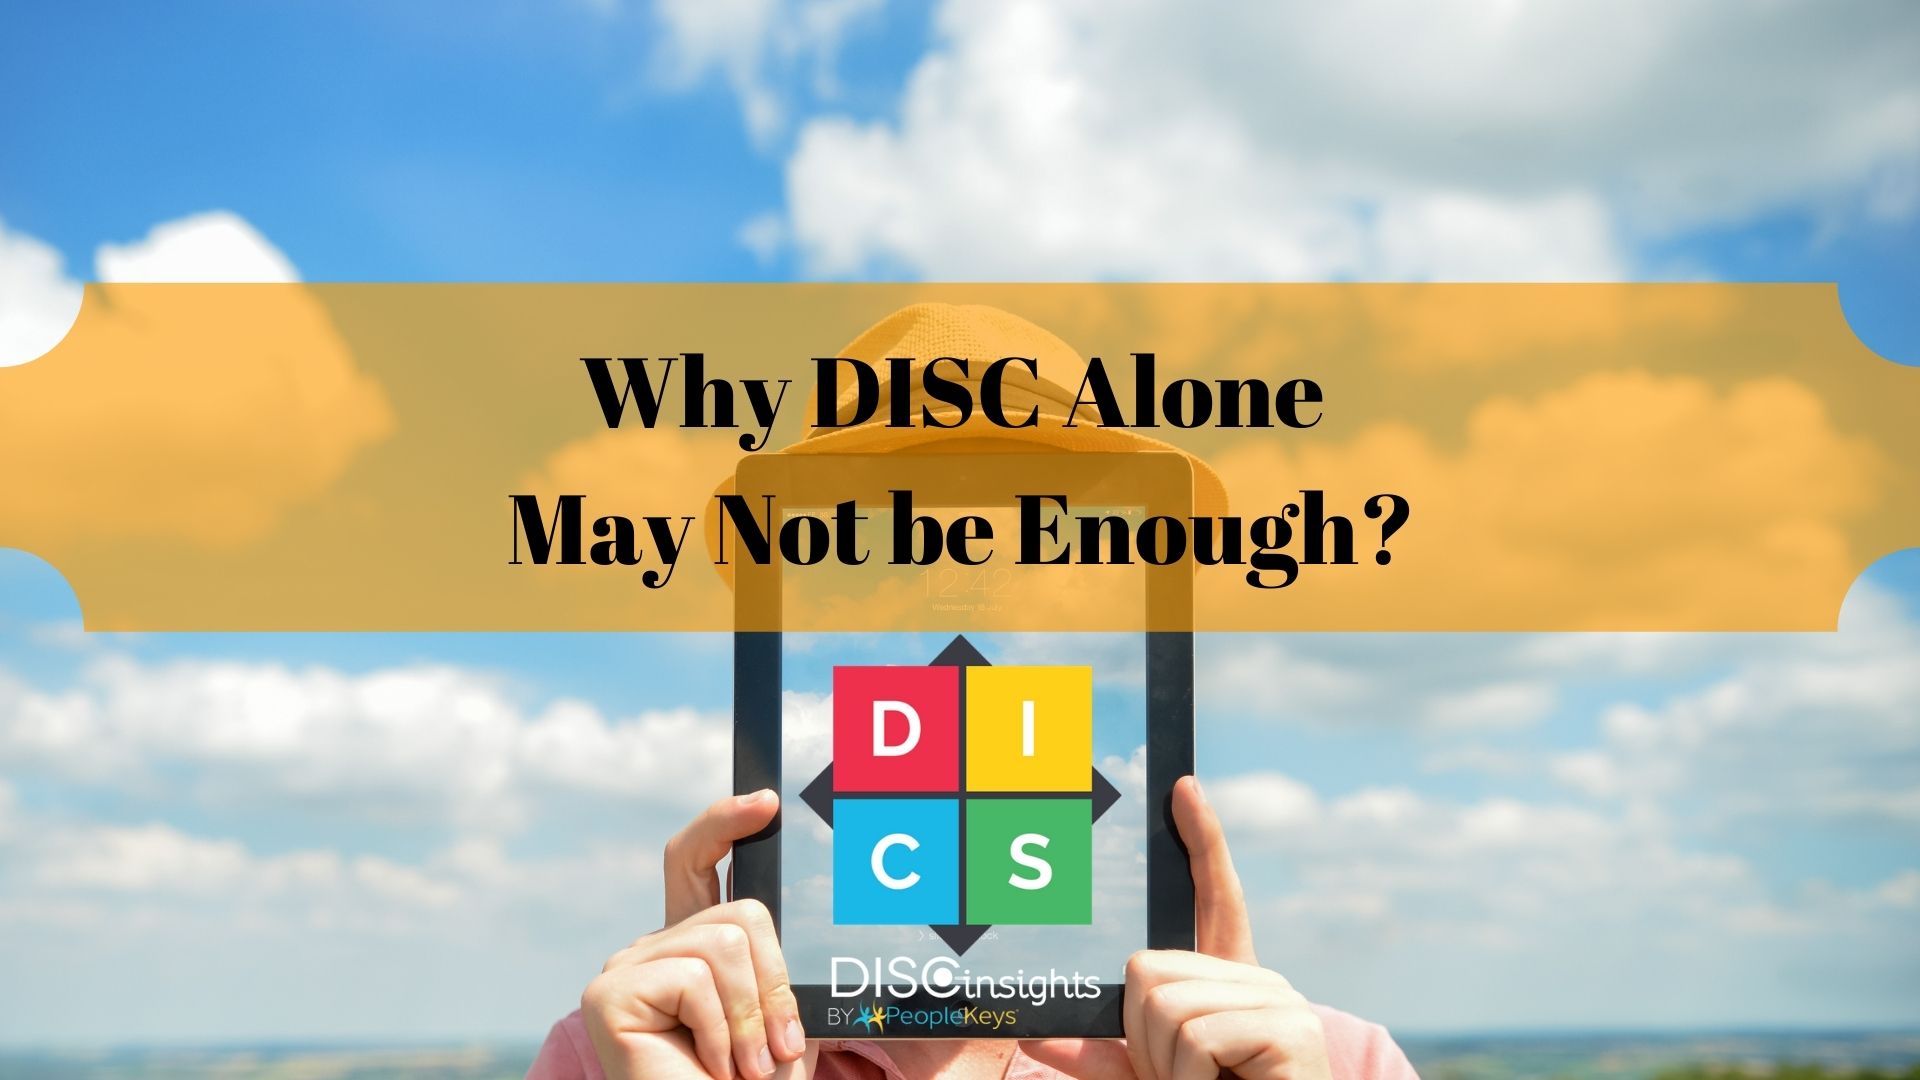 Why DISC alone may not be enough?